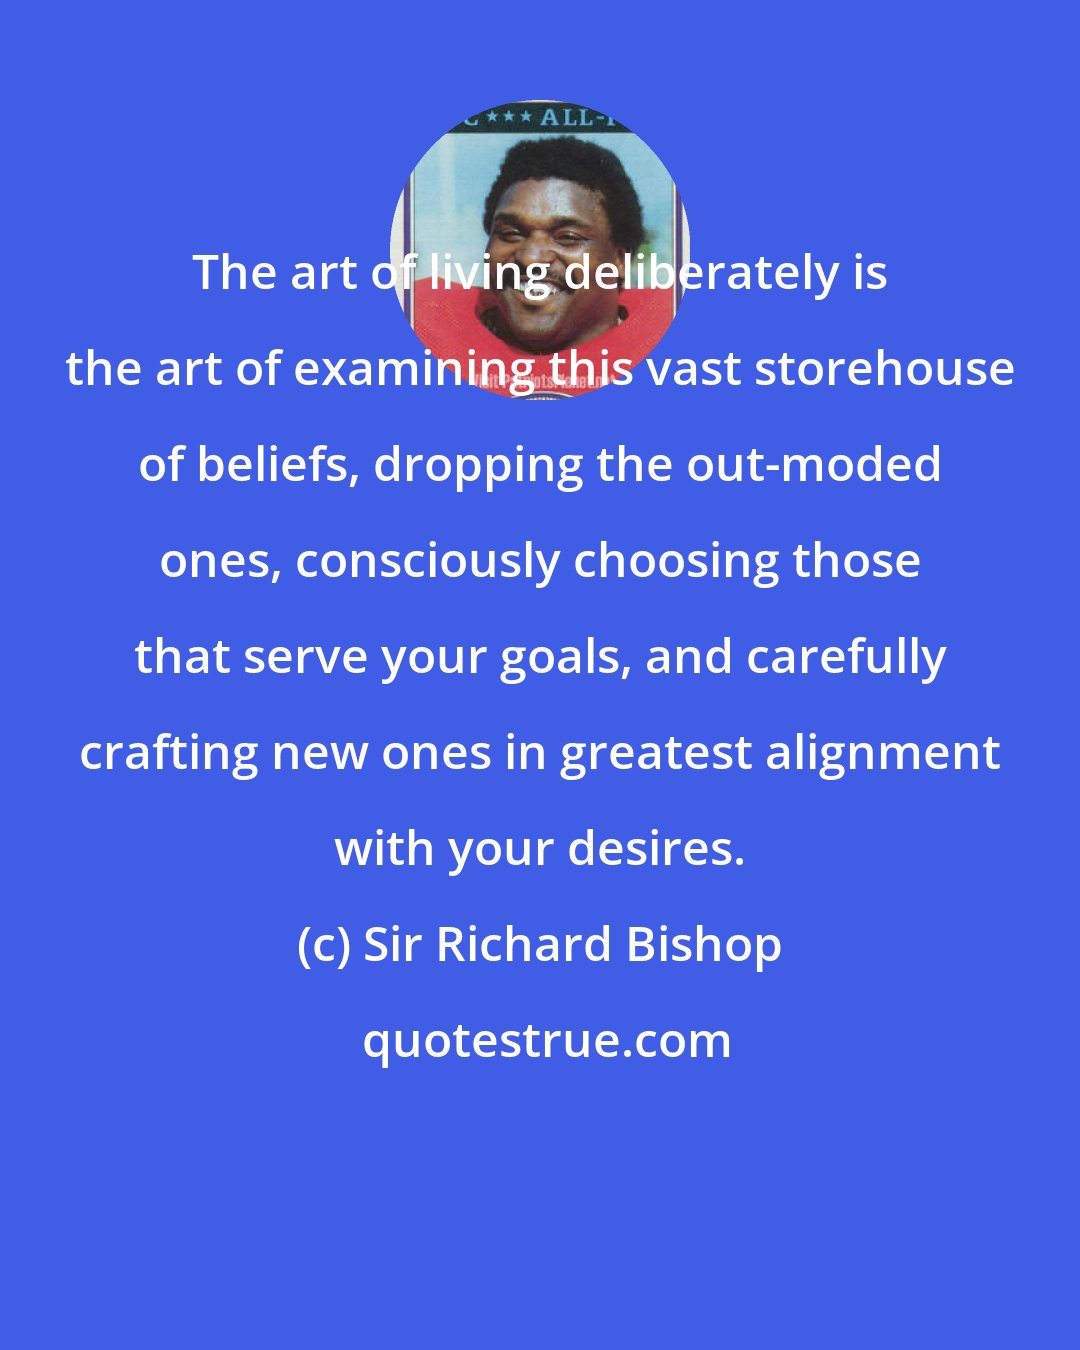 Sir Richard Bishop: The art of living deliberately is the art of examining this vast storehouse of beliefs, dropping the out-moded ones, consciously choosing those that serve your goals, and carefully crafting new ones in greatest alignment with your desires.